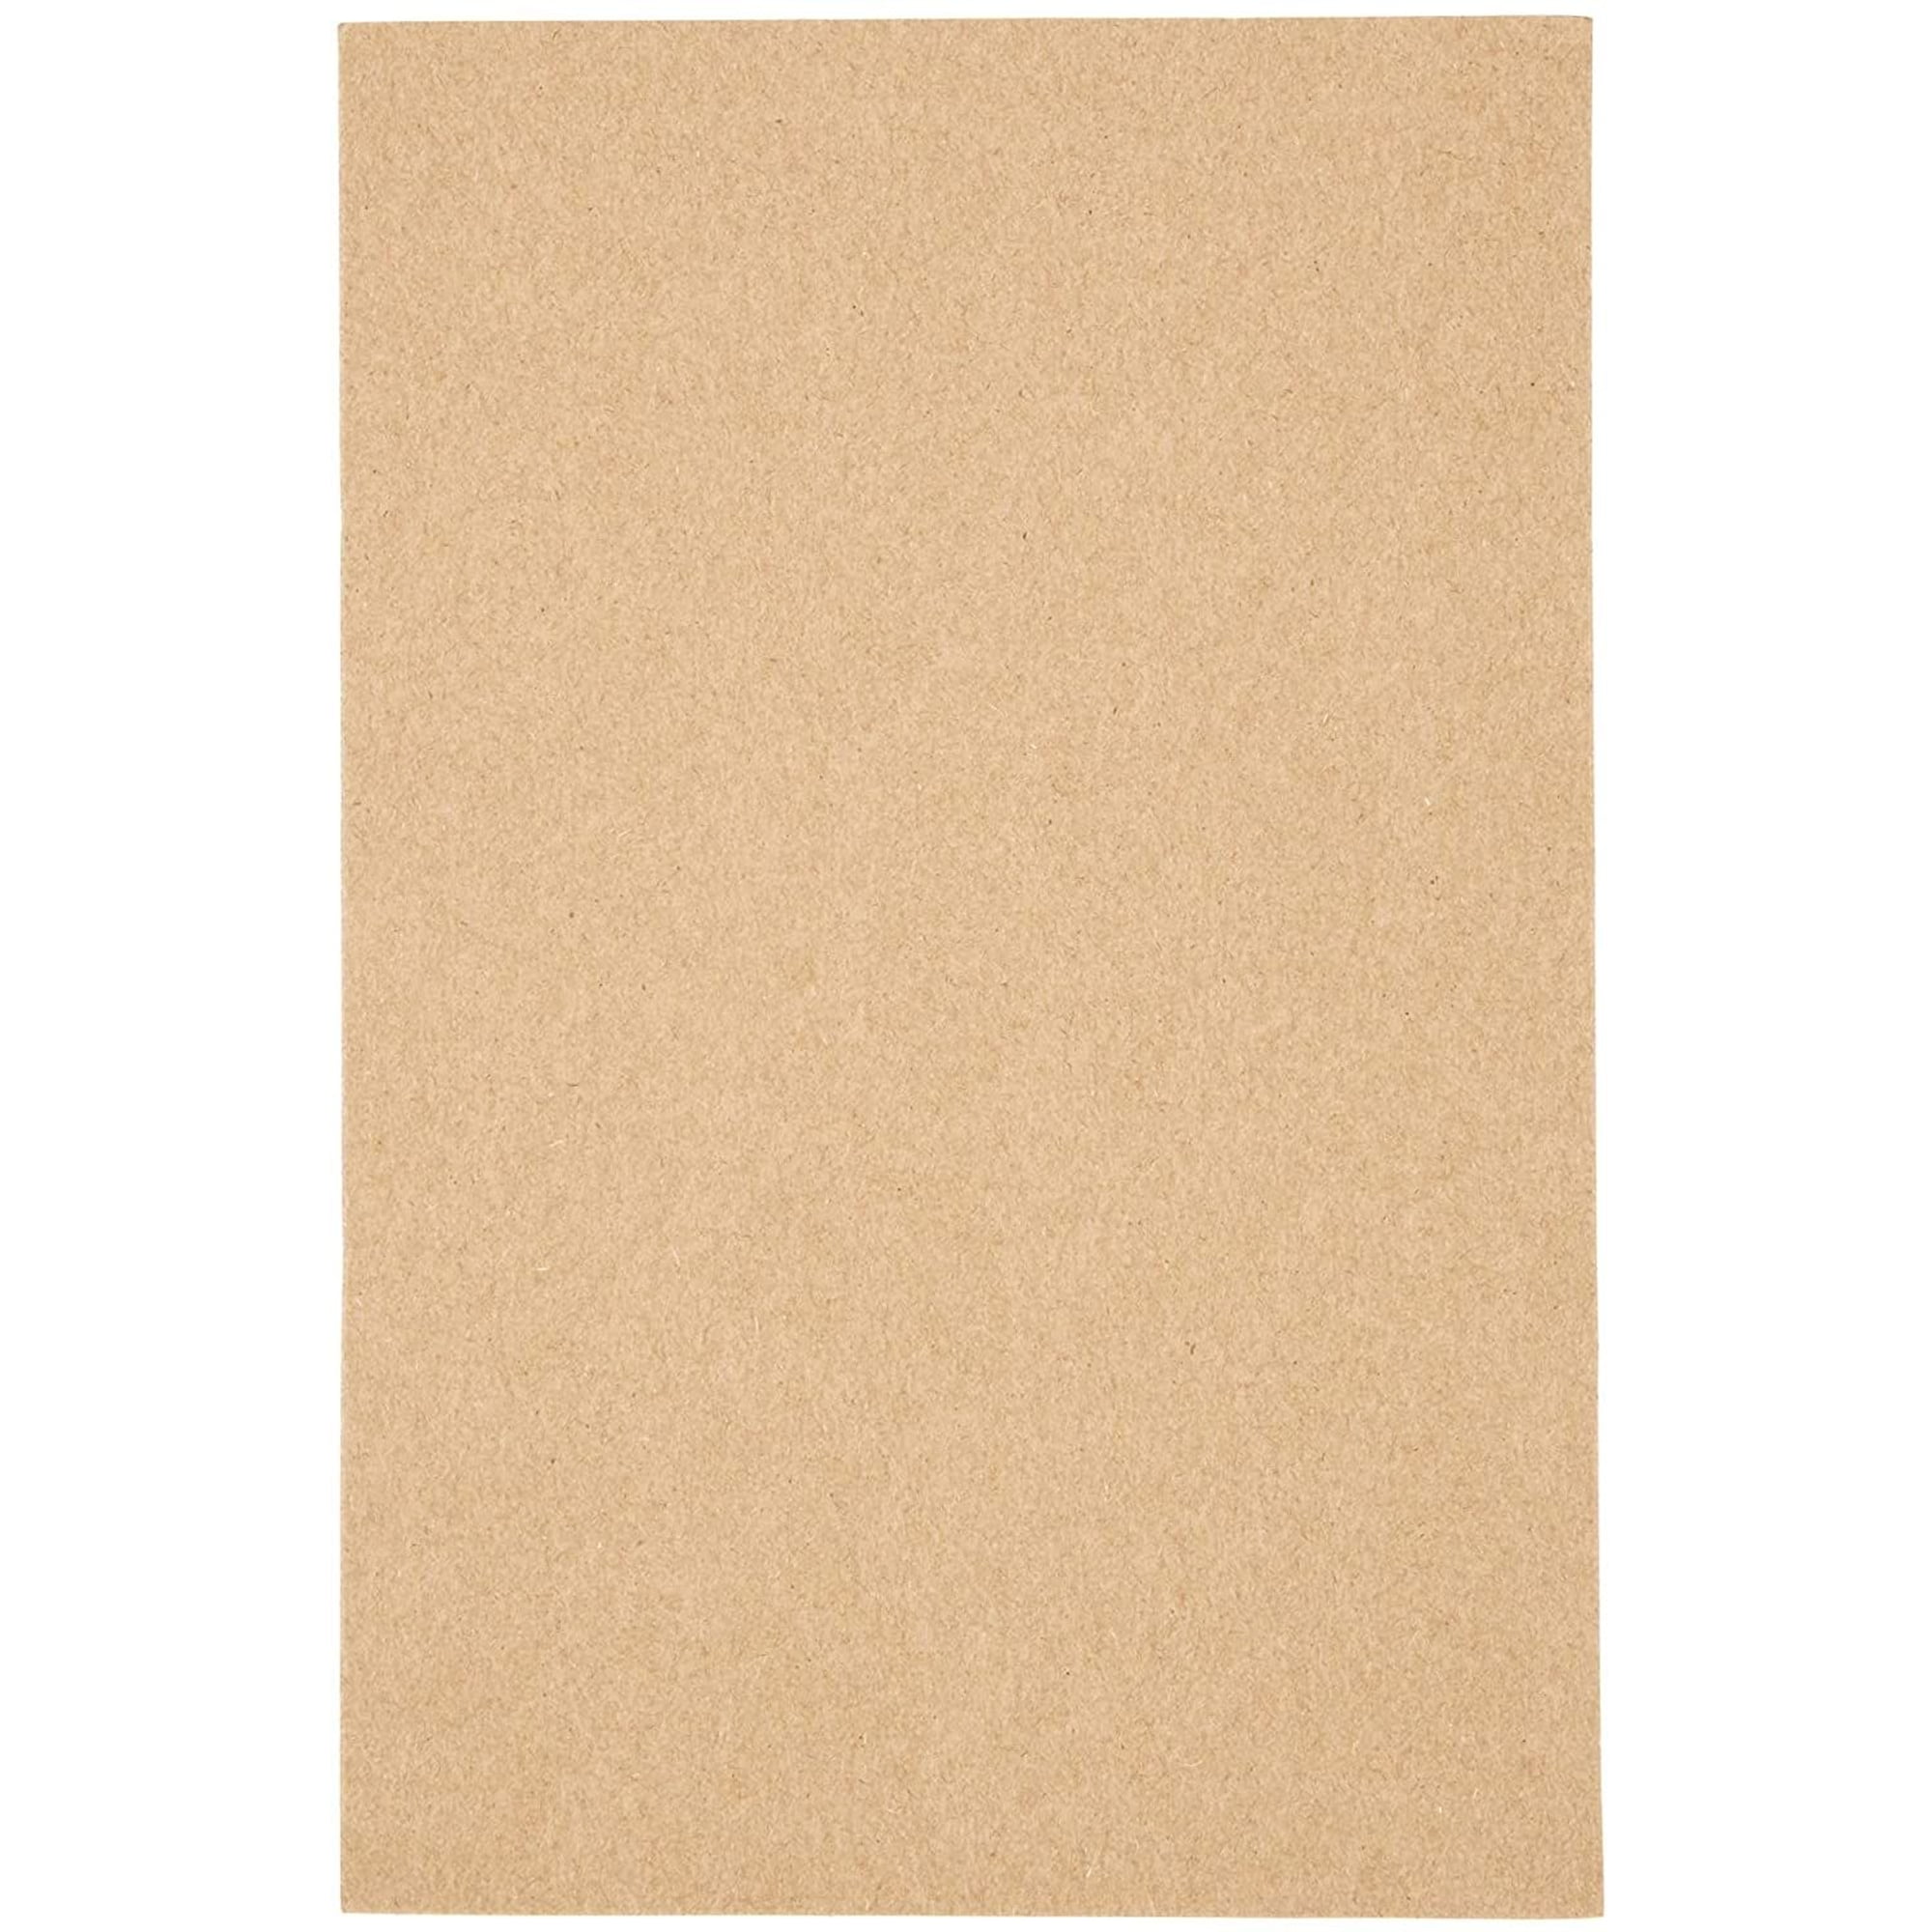 Corrugated Cardboard Filler Insert Sheet Pads 1/8 Thick - 9 x 6 Inche —  MagicWater Supply